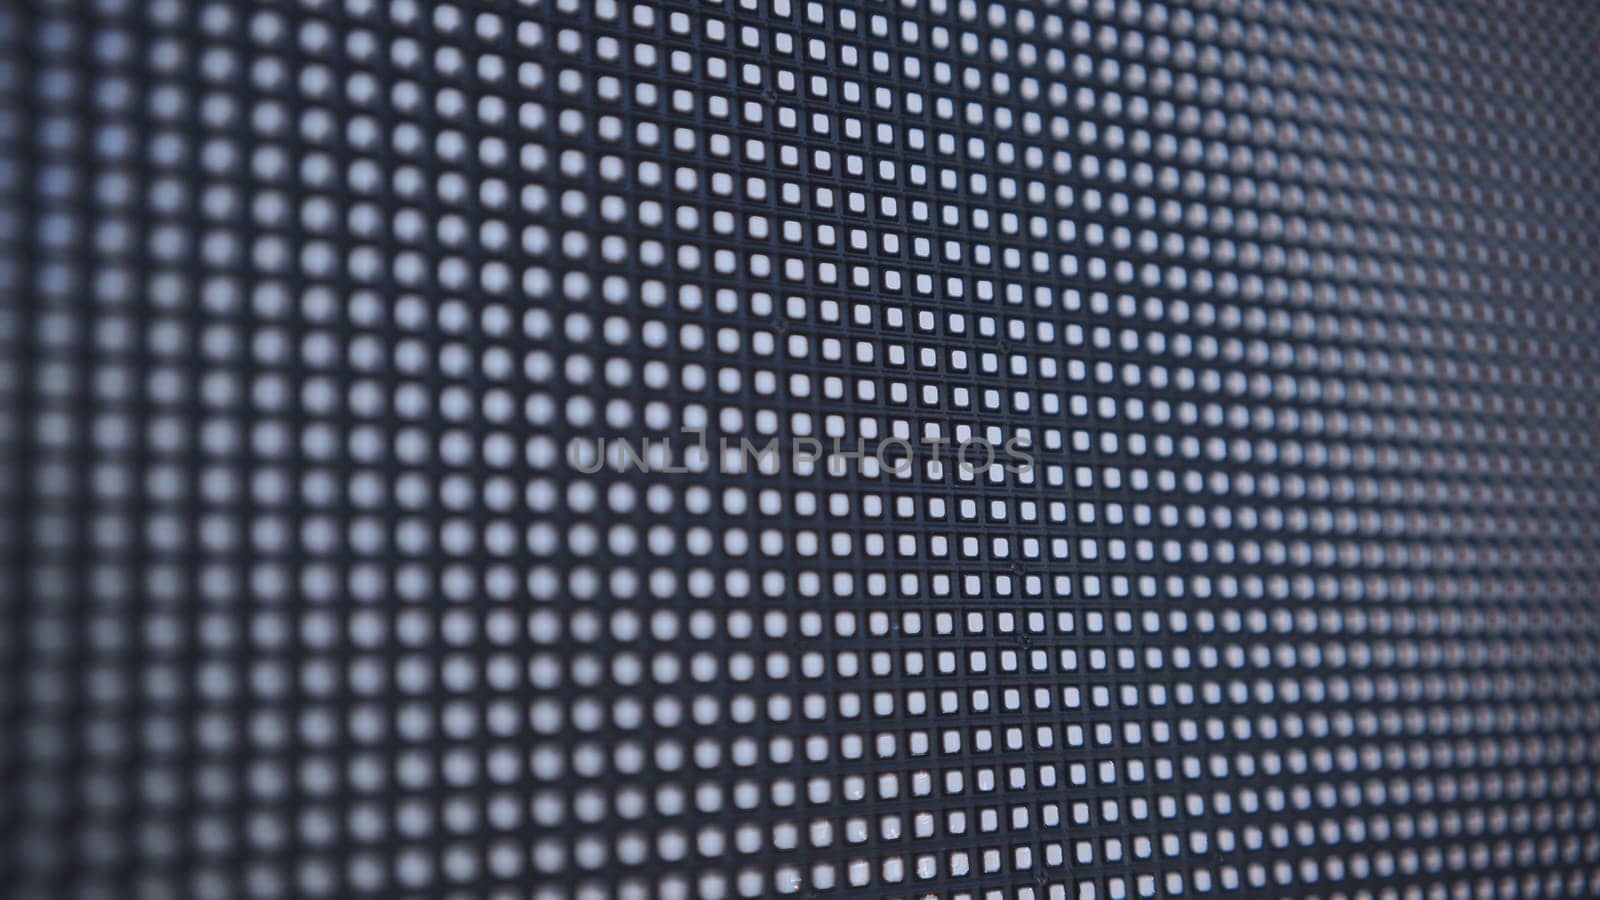 LED screen in operation outside. Close-up view. by DovidPro